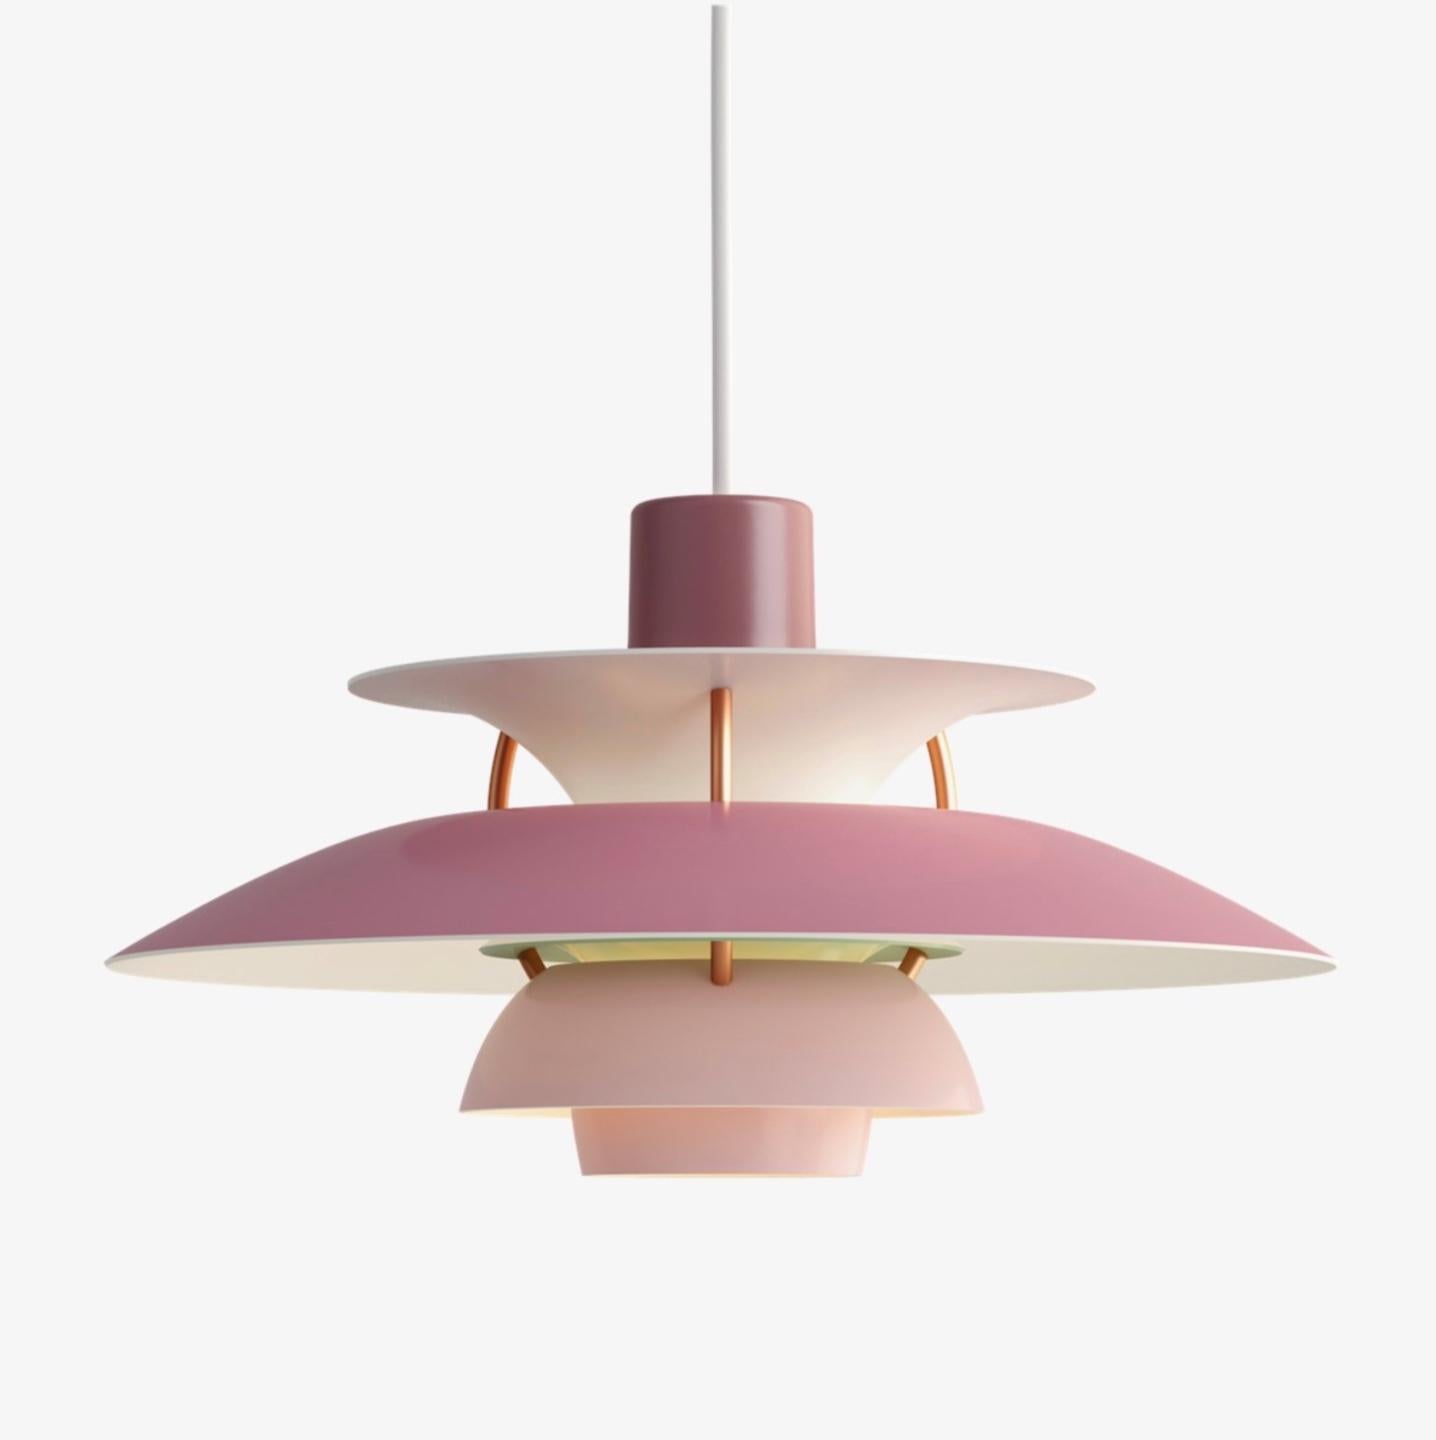 Poul Henningsen PH5 Mini pendant for Louis Poulsen. Designed 1958, Mini in 2017. New, current production.

Poul Henningsen developed the PH 5 in 1958 in response to constant changes made to the shape and size of incandescent bulbs by bulb